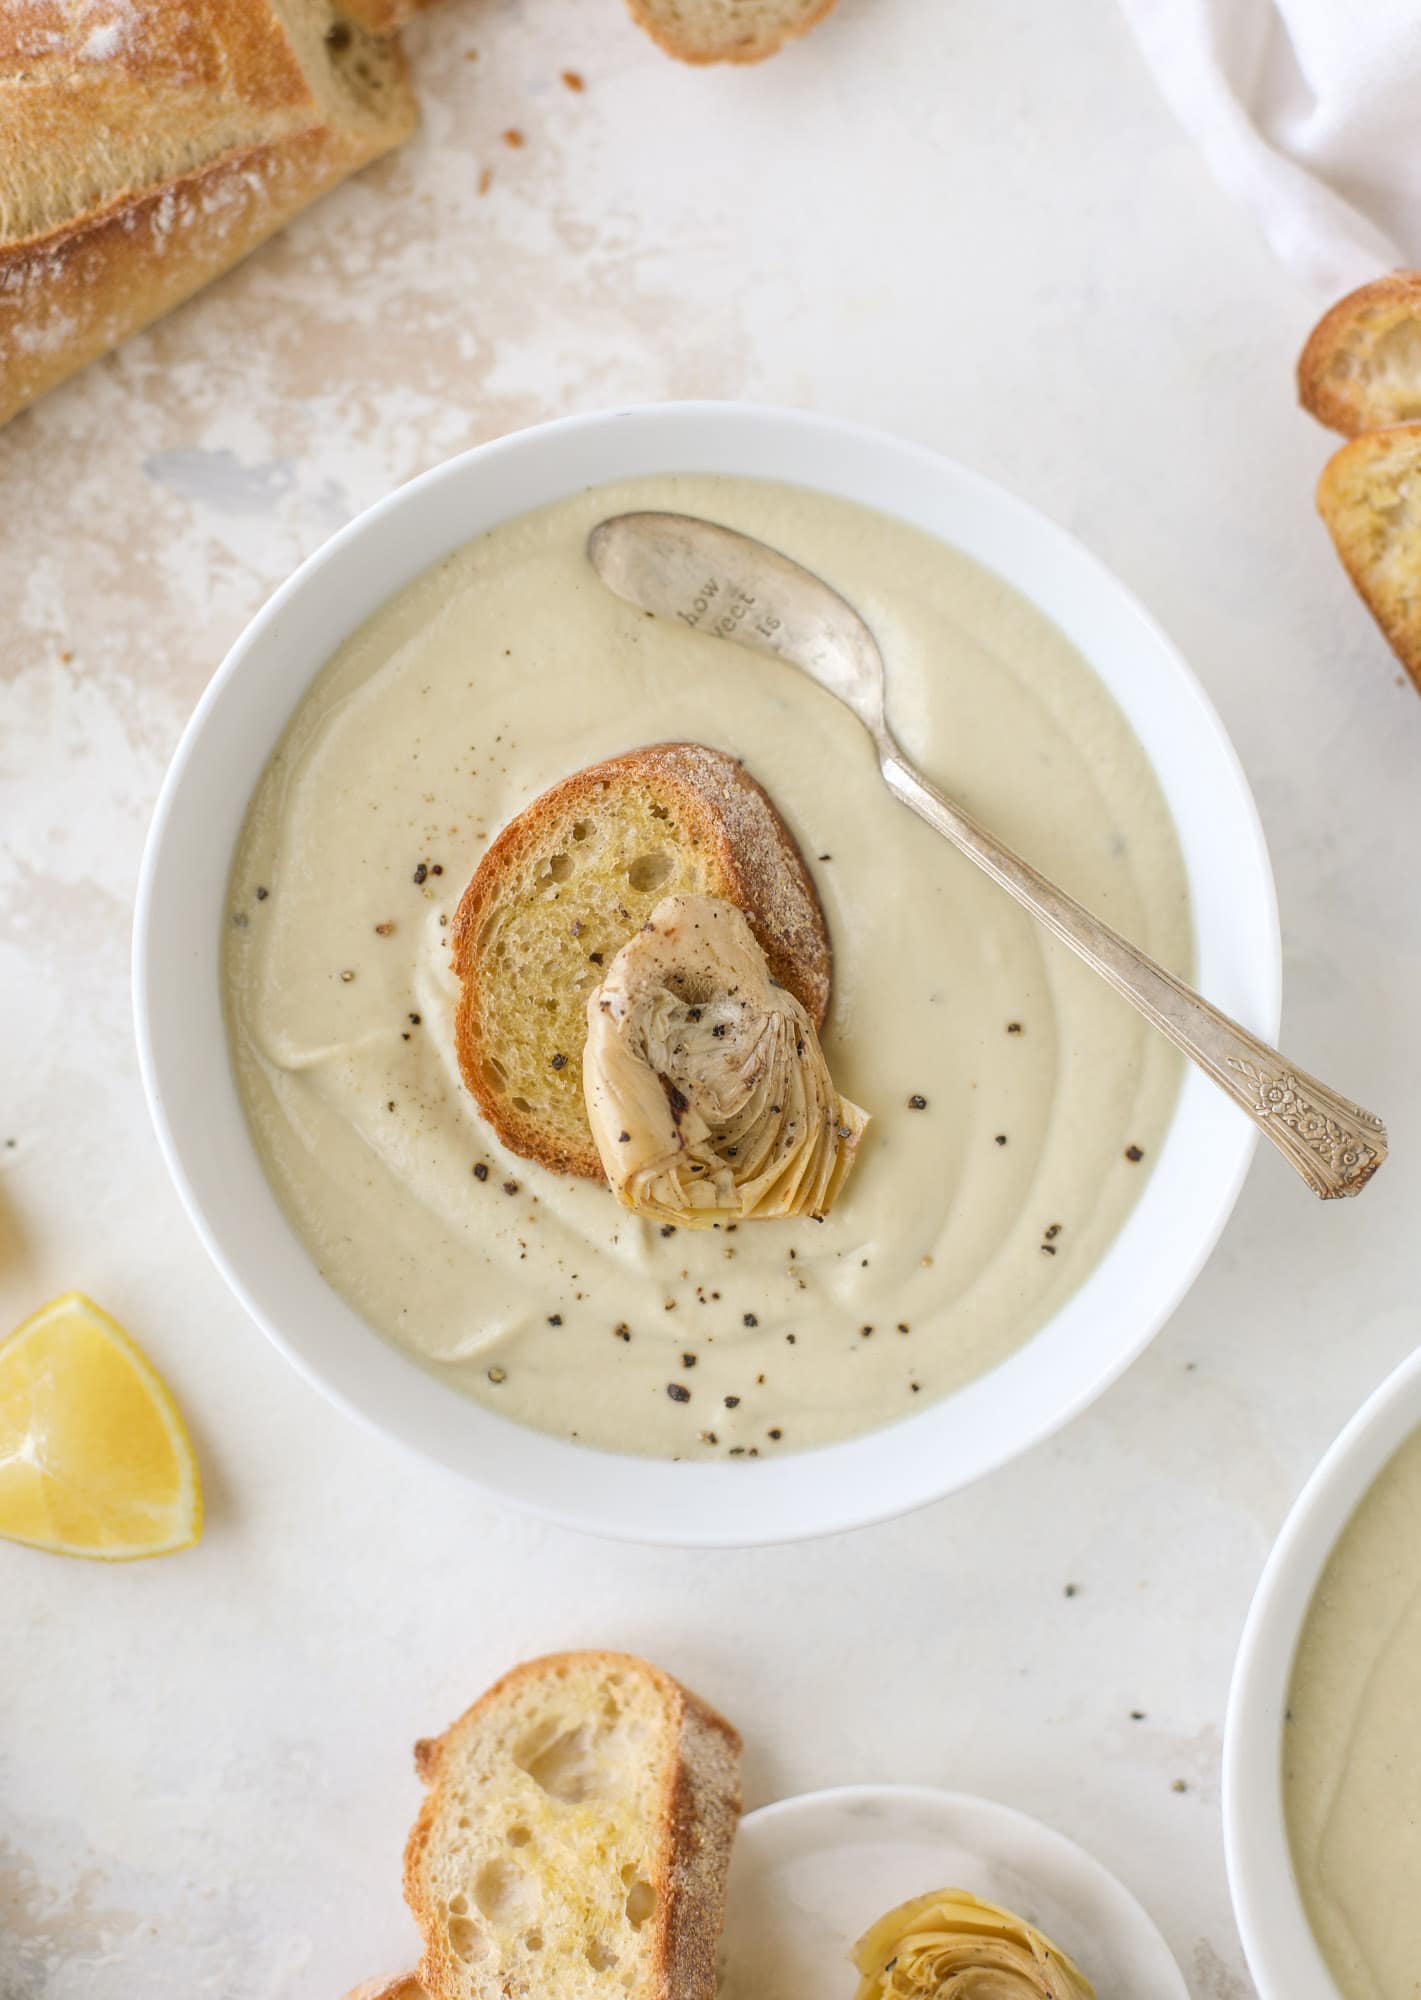  This creamy artichoke soup is full of artichoke hearts, cream and crème fraiche. It's rich and hearty but also light in flavor - perfect for late winter. I howsweeteats.com #artichoke #soup